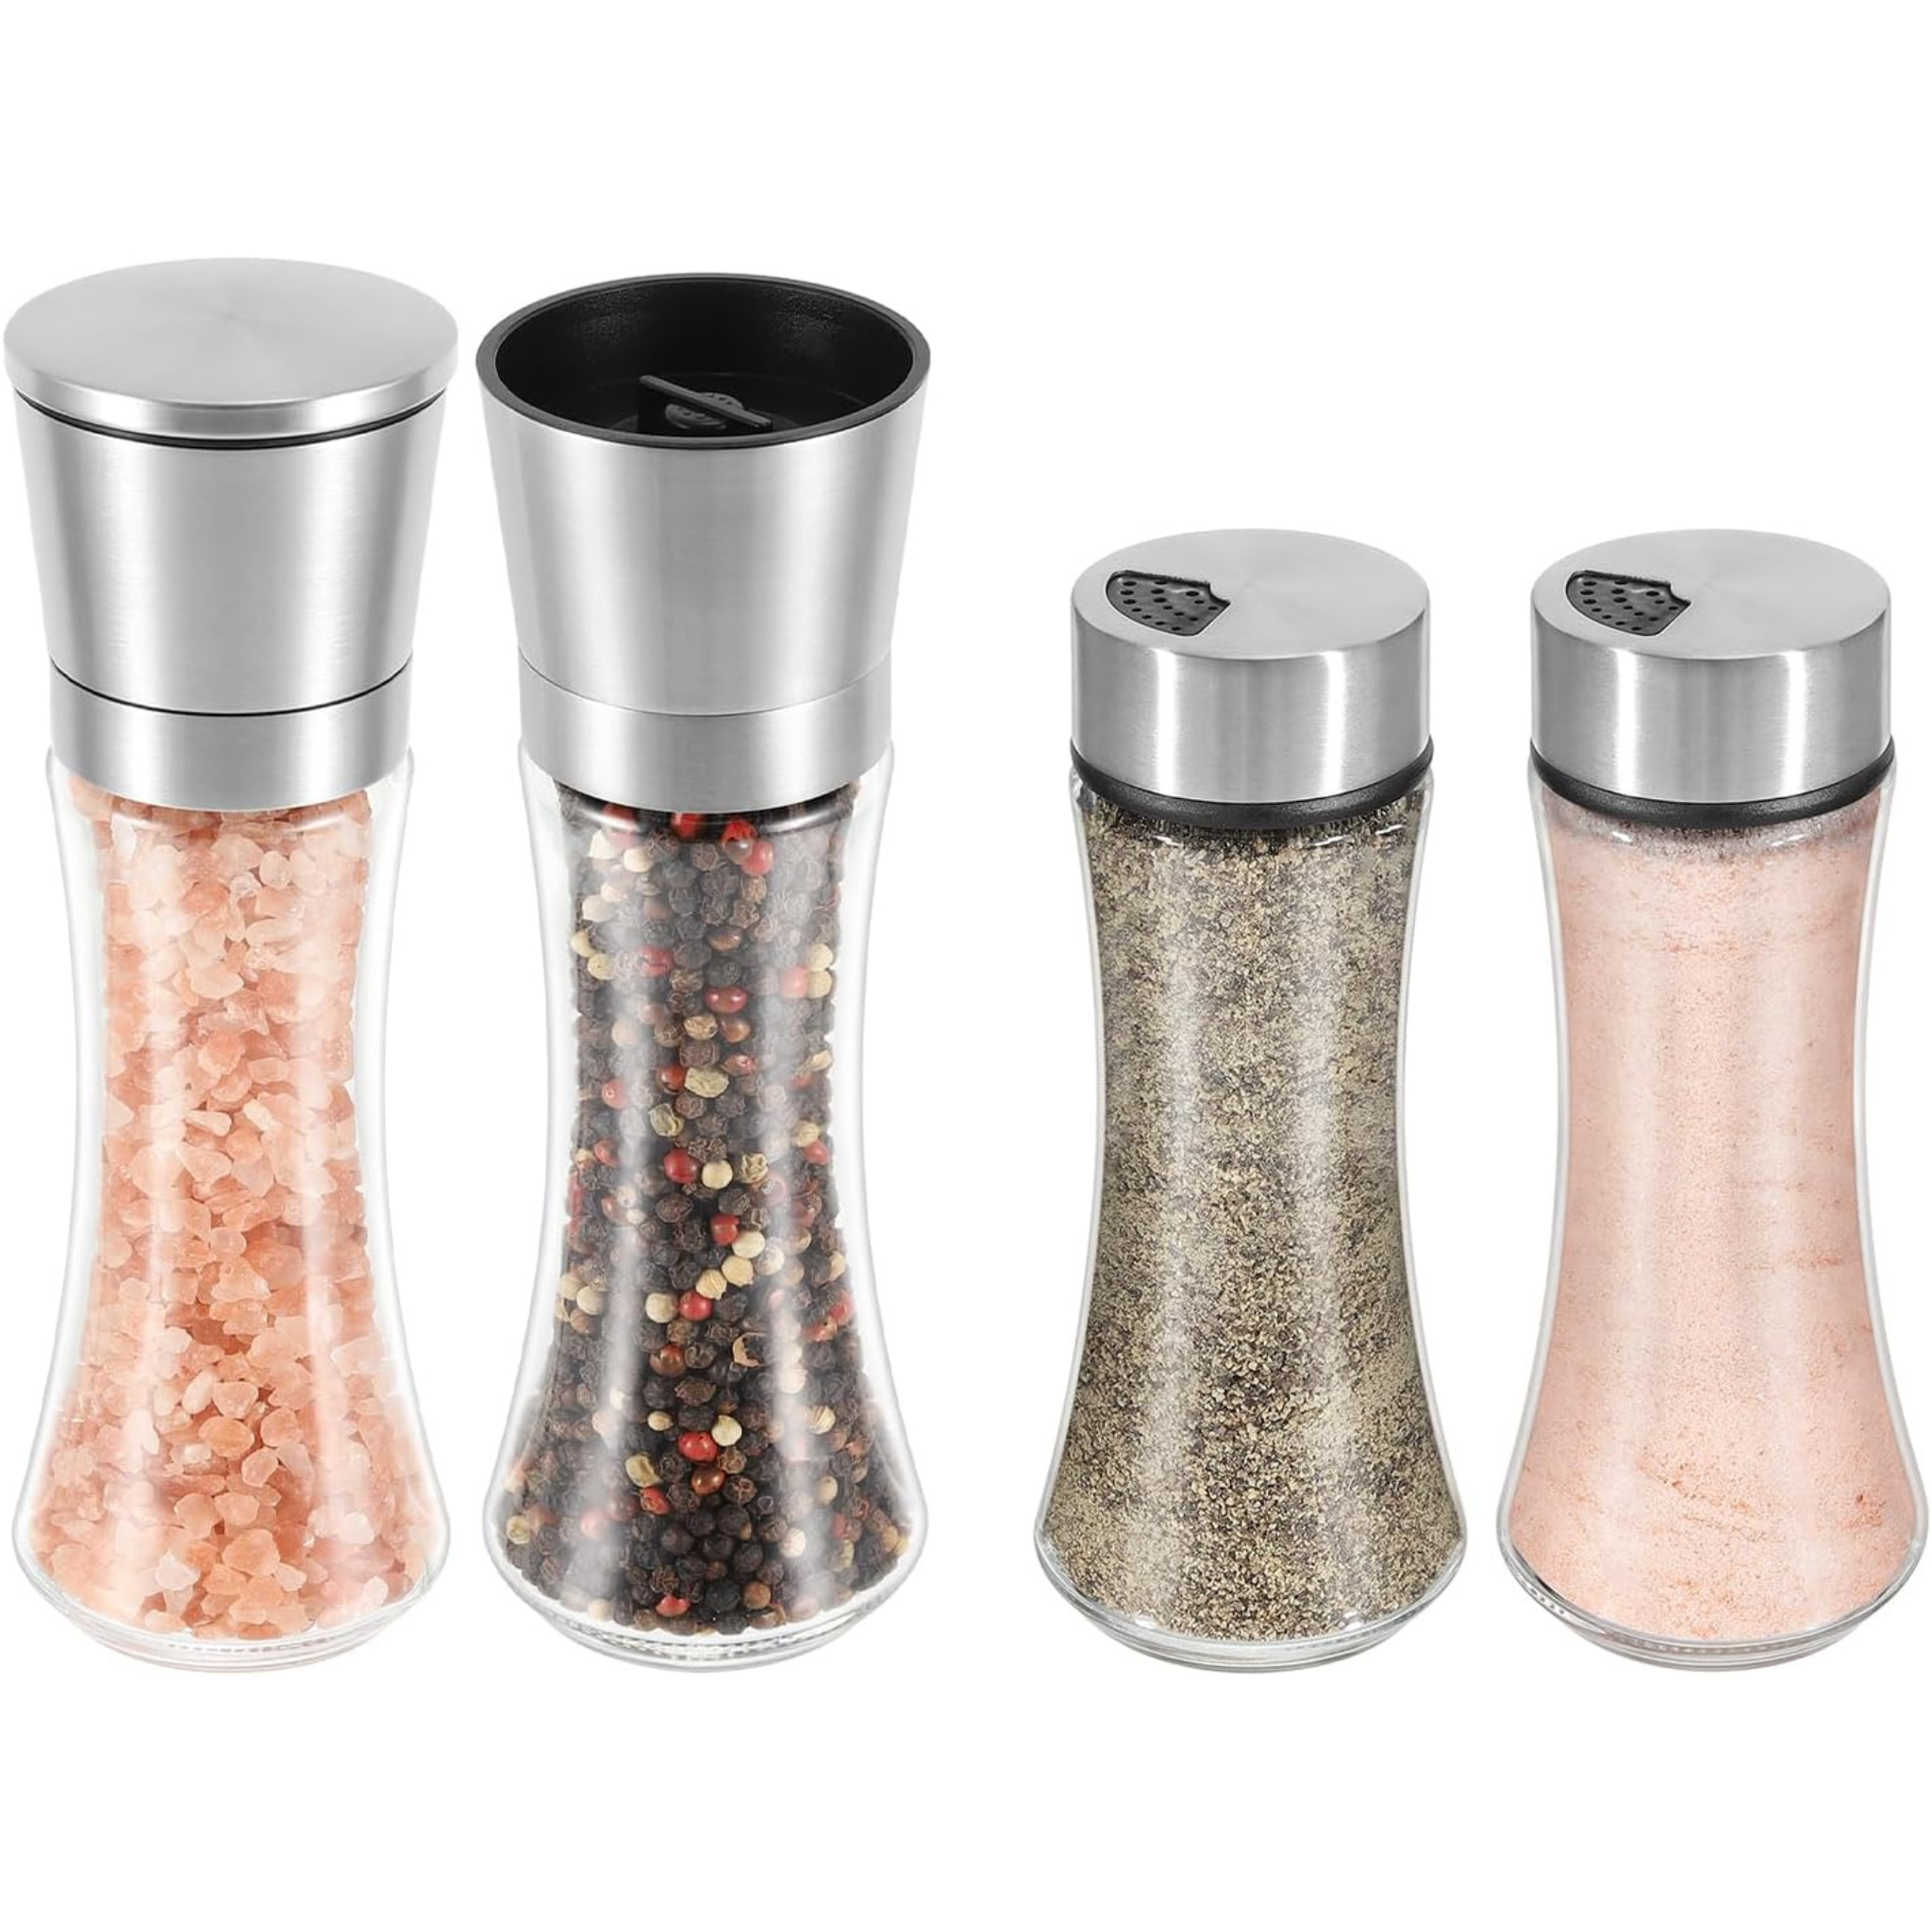 Set of 4 Vucchini Salt and Pepper Grinder with Shaker